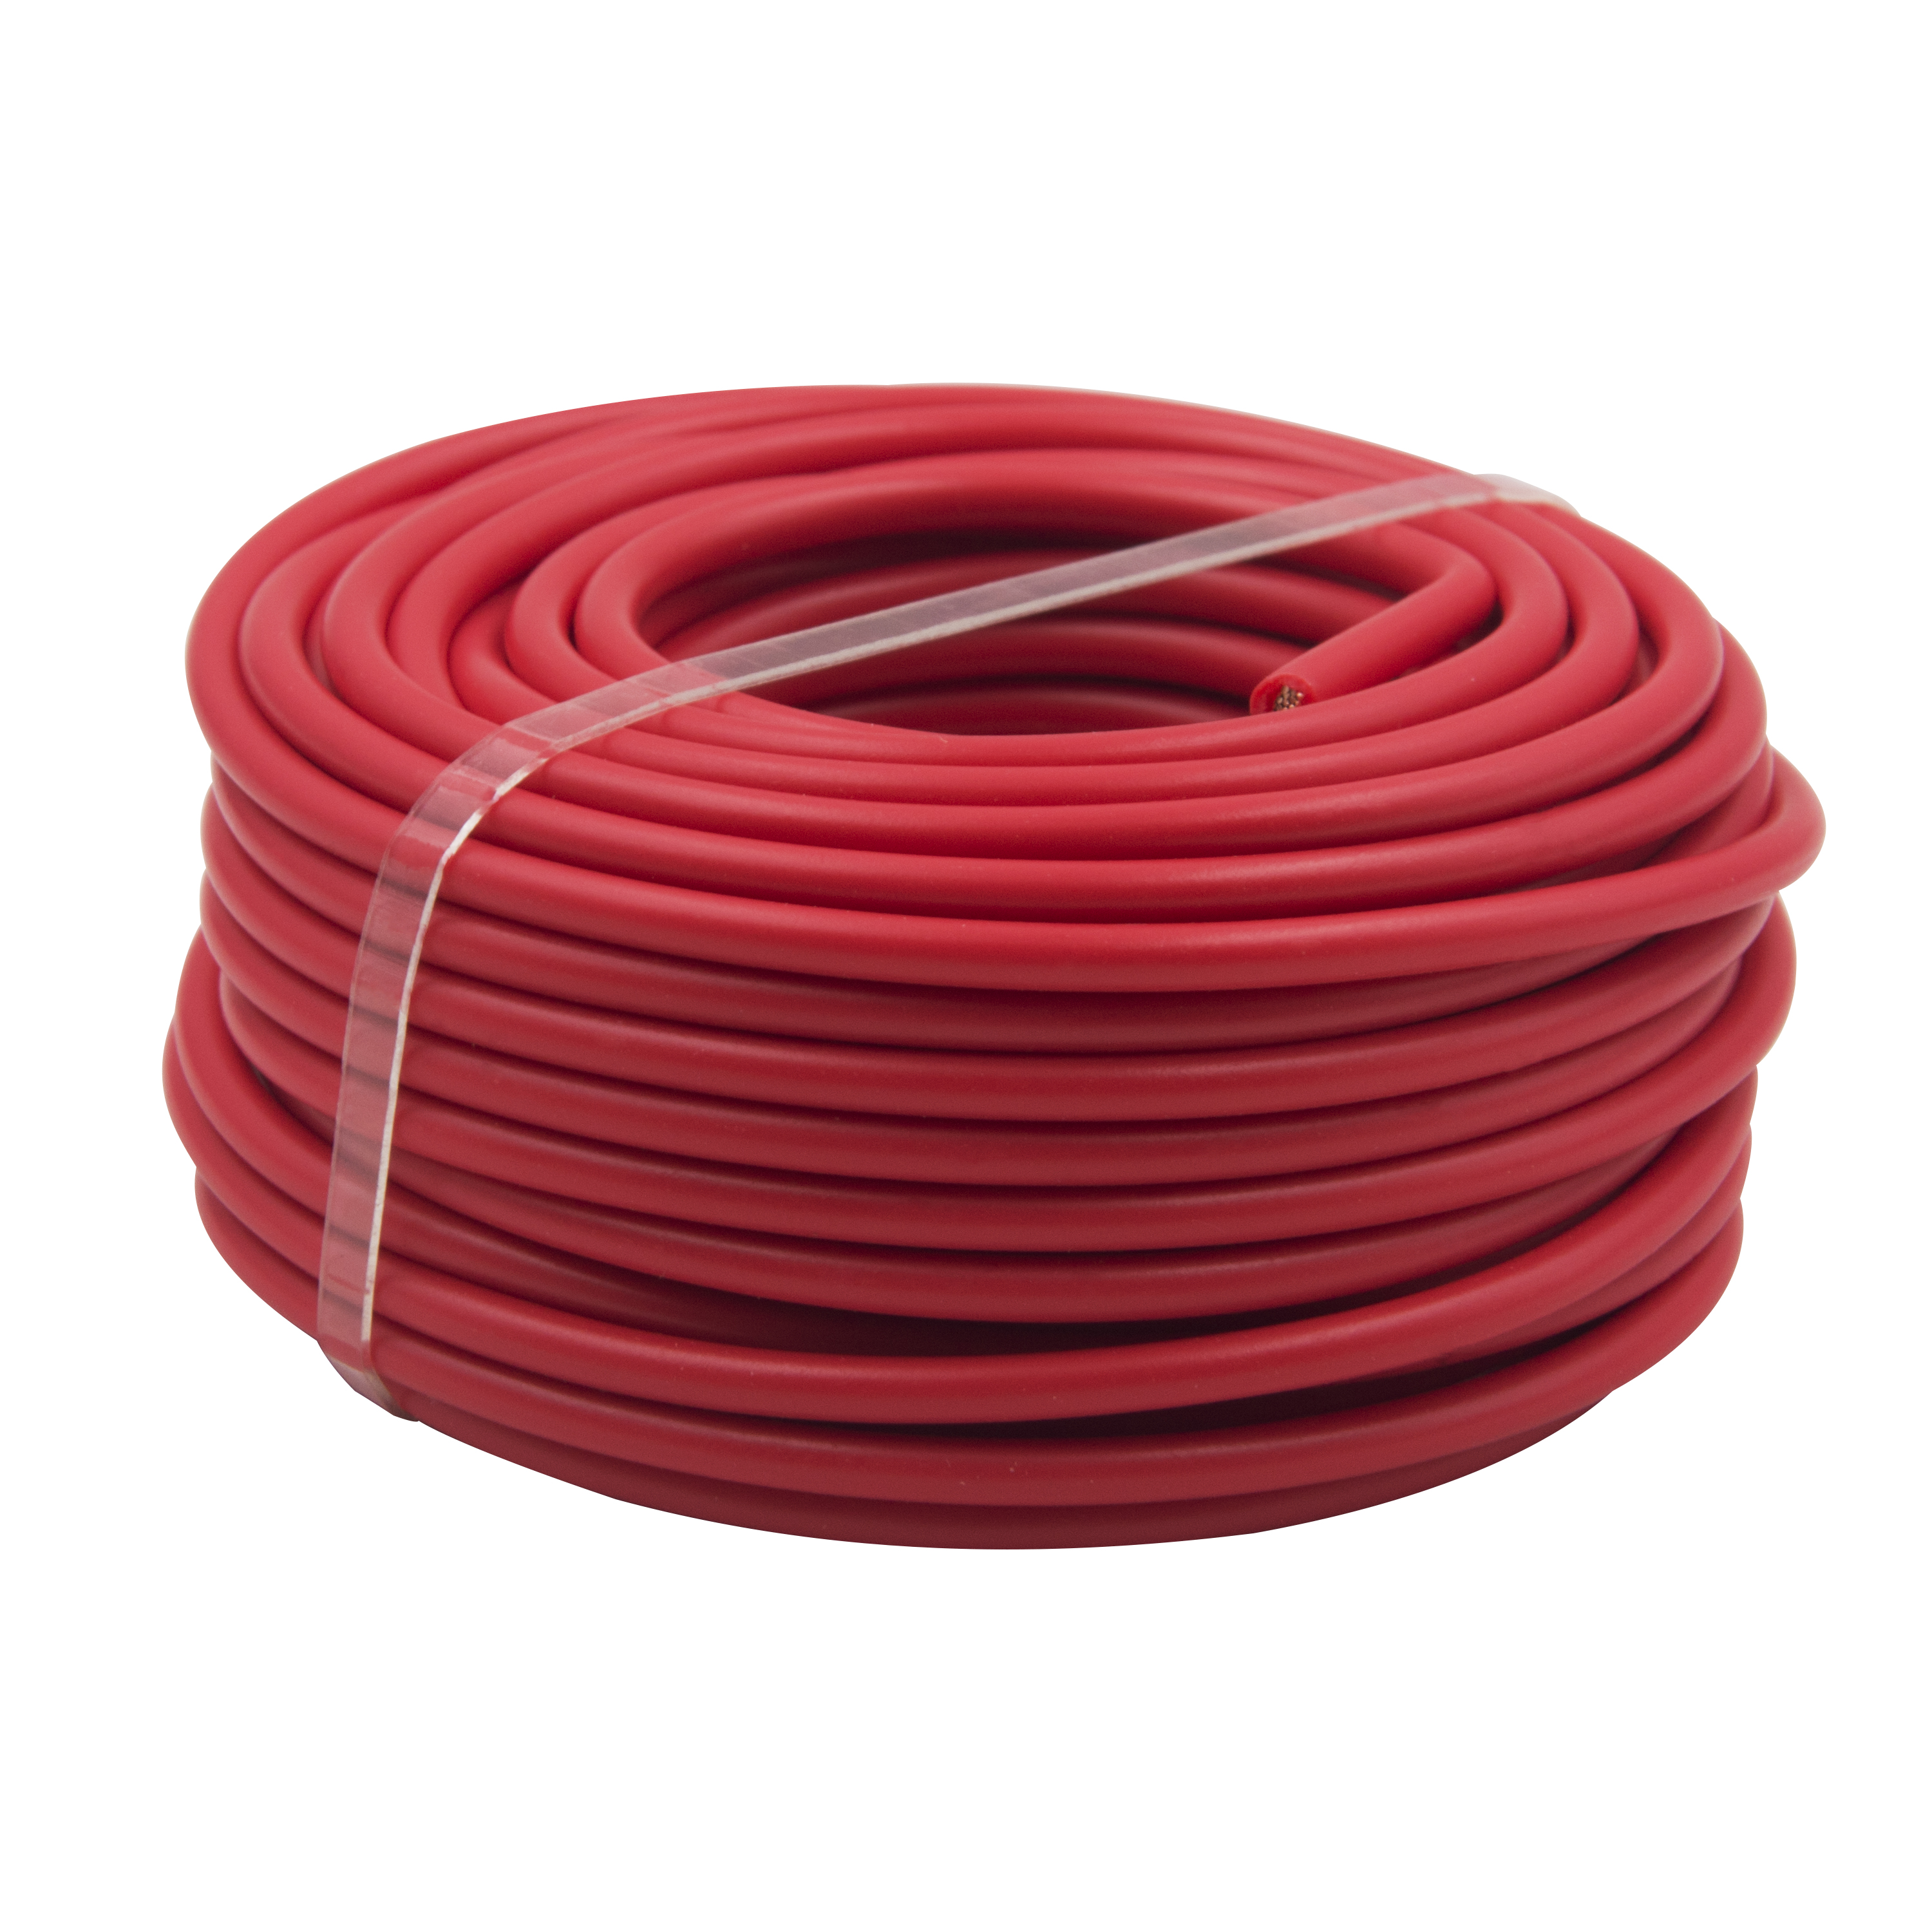 Everstart 30 Feet 16 Gauge Red Auto Wire Roll For Tail Lights, Coil Wire, Directional Signals, Gas Gauge, Heater Leads, Stop Signals, Home Light, Starter Relay, Instrument Lamps, Parking Lights - image 3 of 8